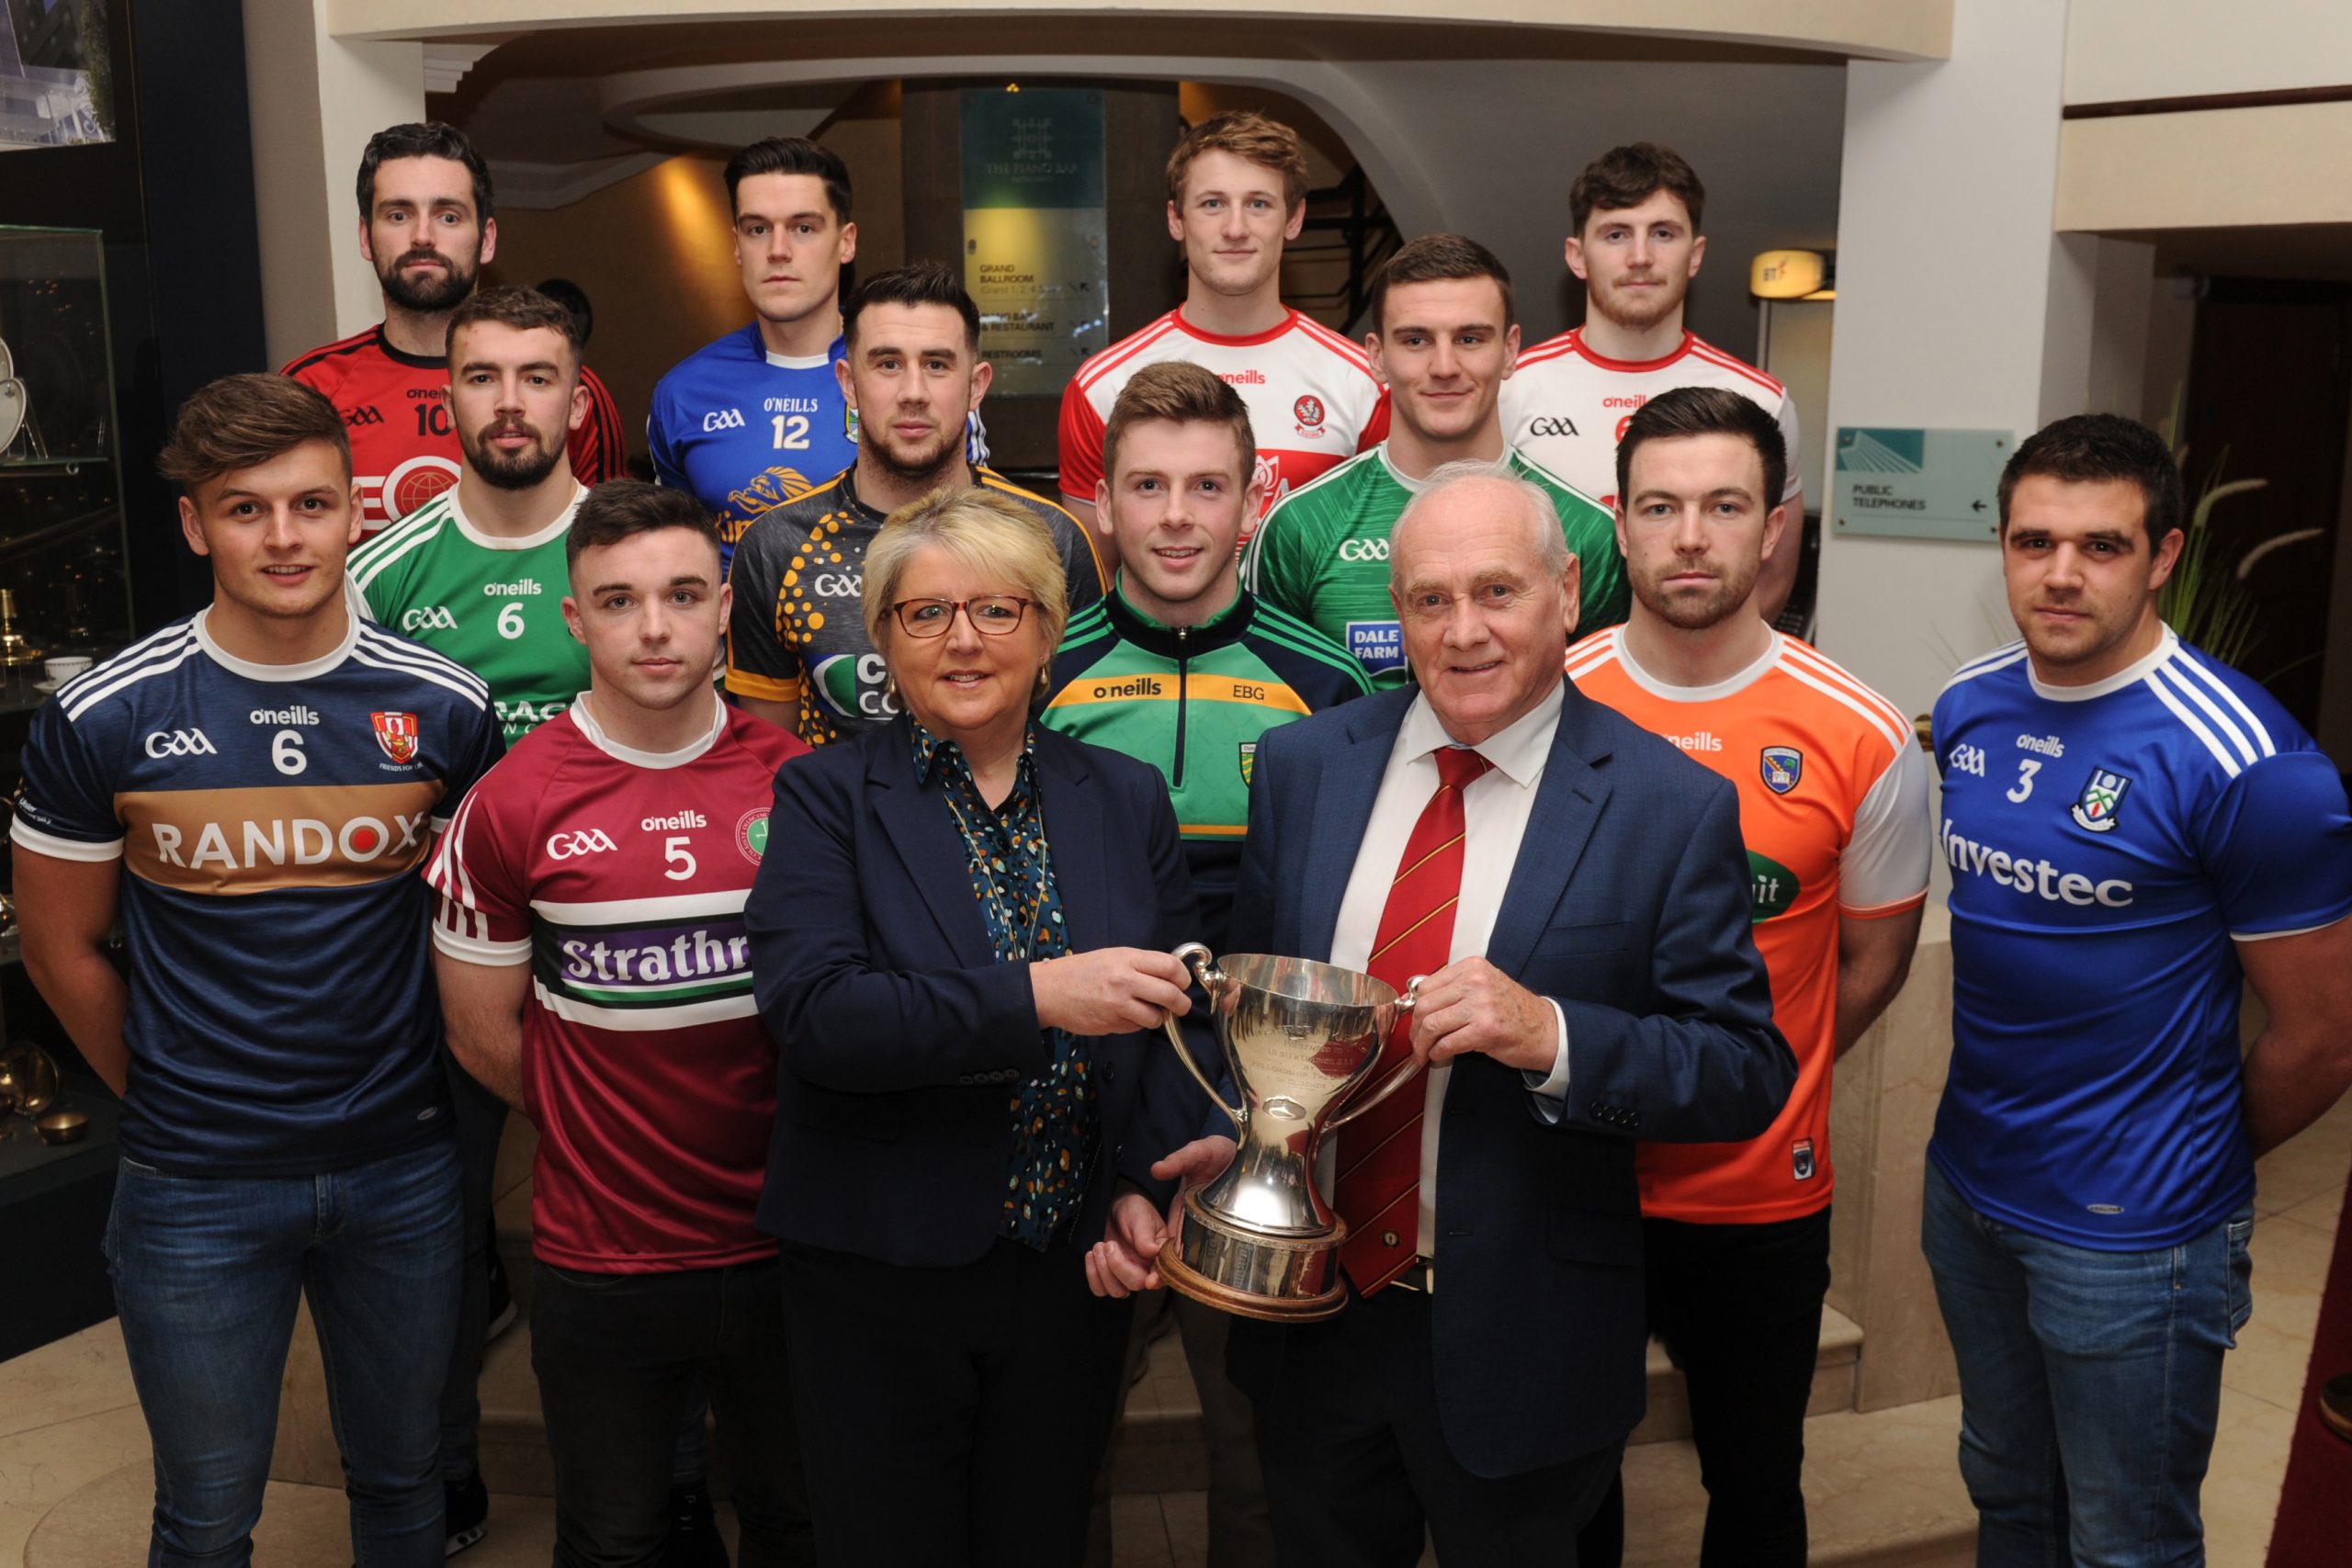 Bank of Ireland Dr McKenna Cup Draw 2019 takes place